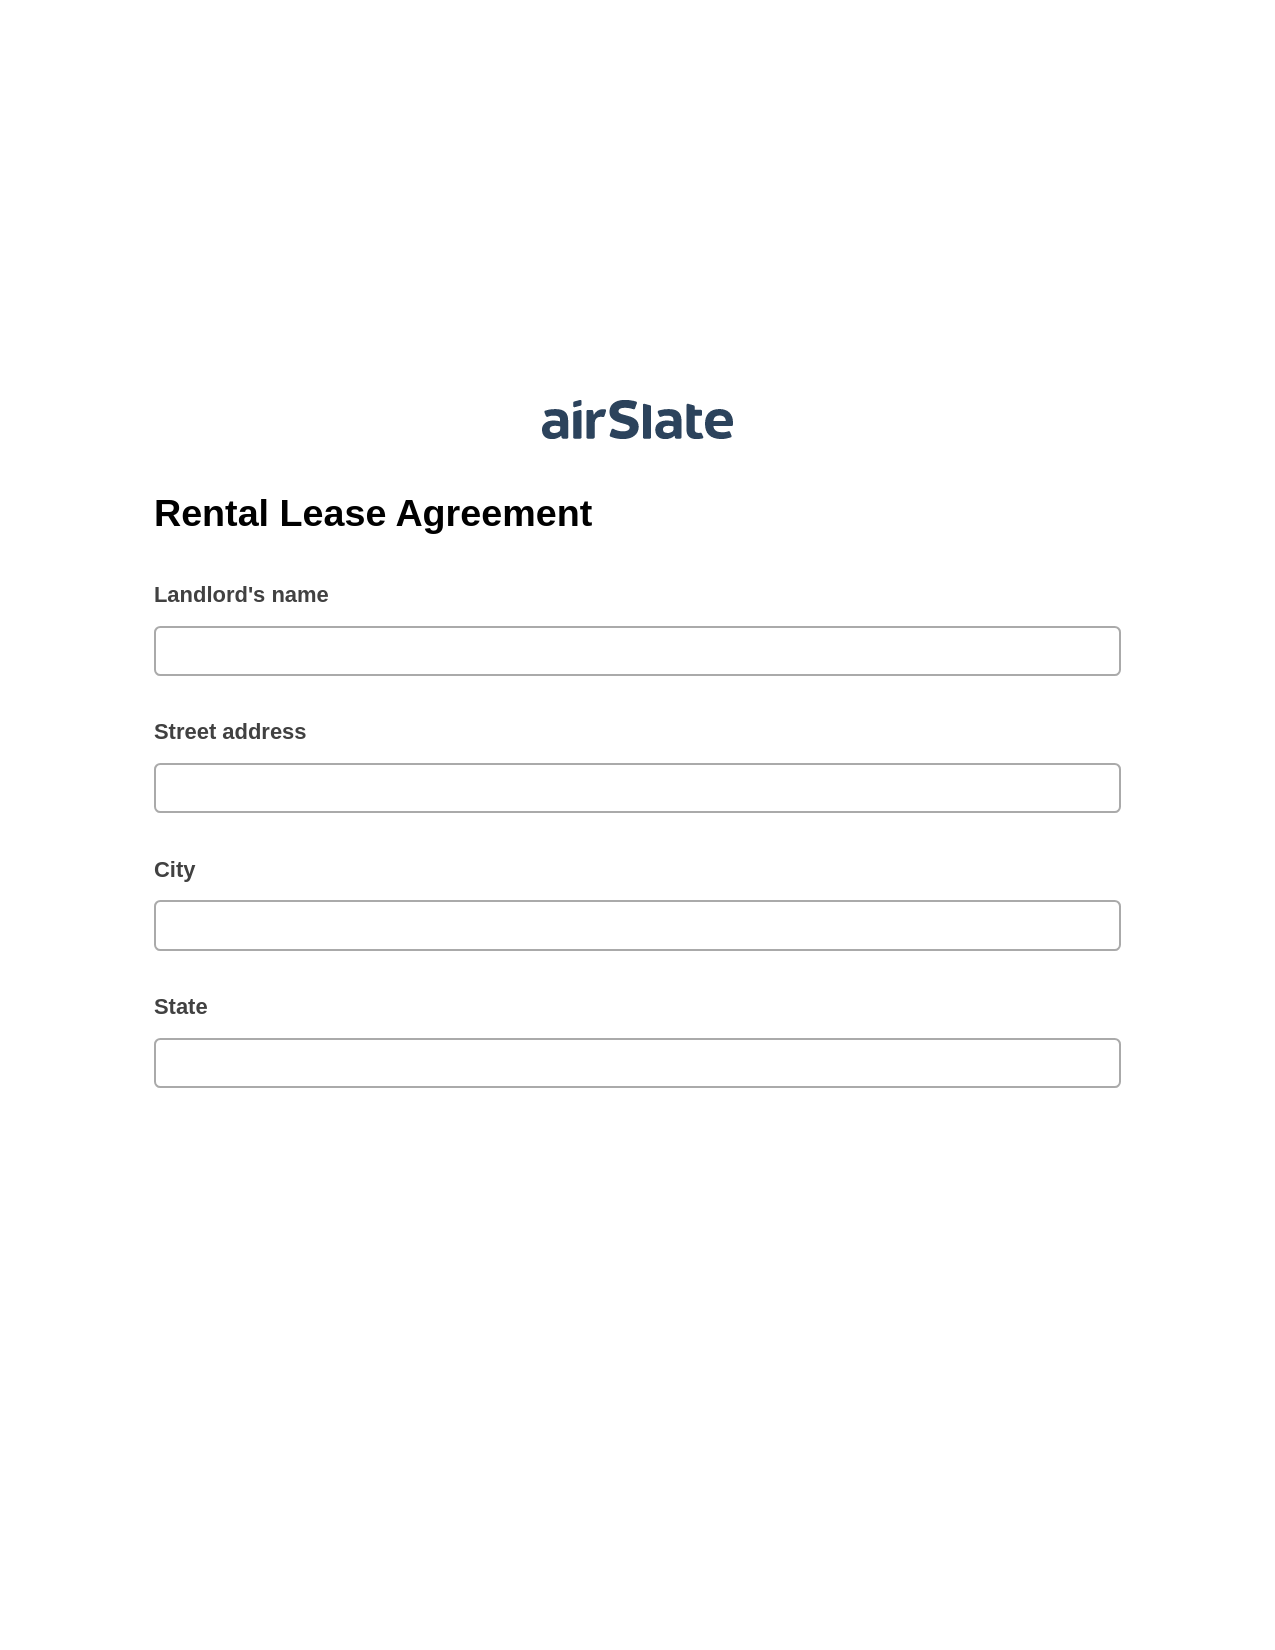 Multirole Rental Lease Agreement Pre-fill from CSV File Bot, Jira Bot, Export to Excel 365 Bot